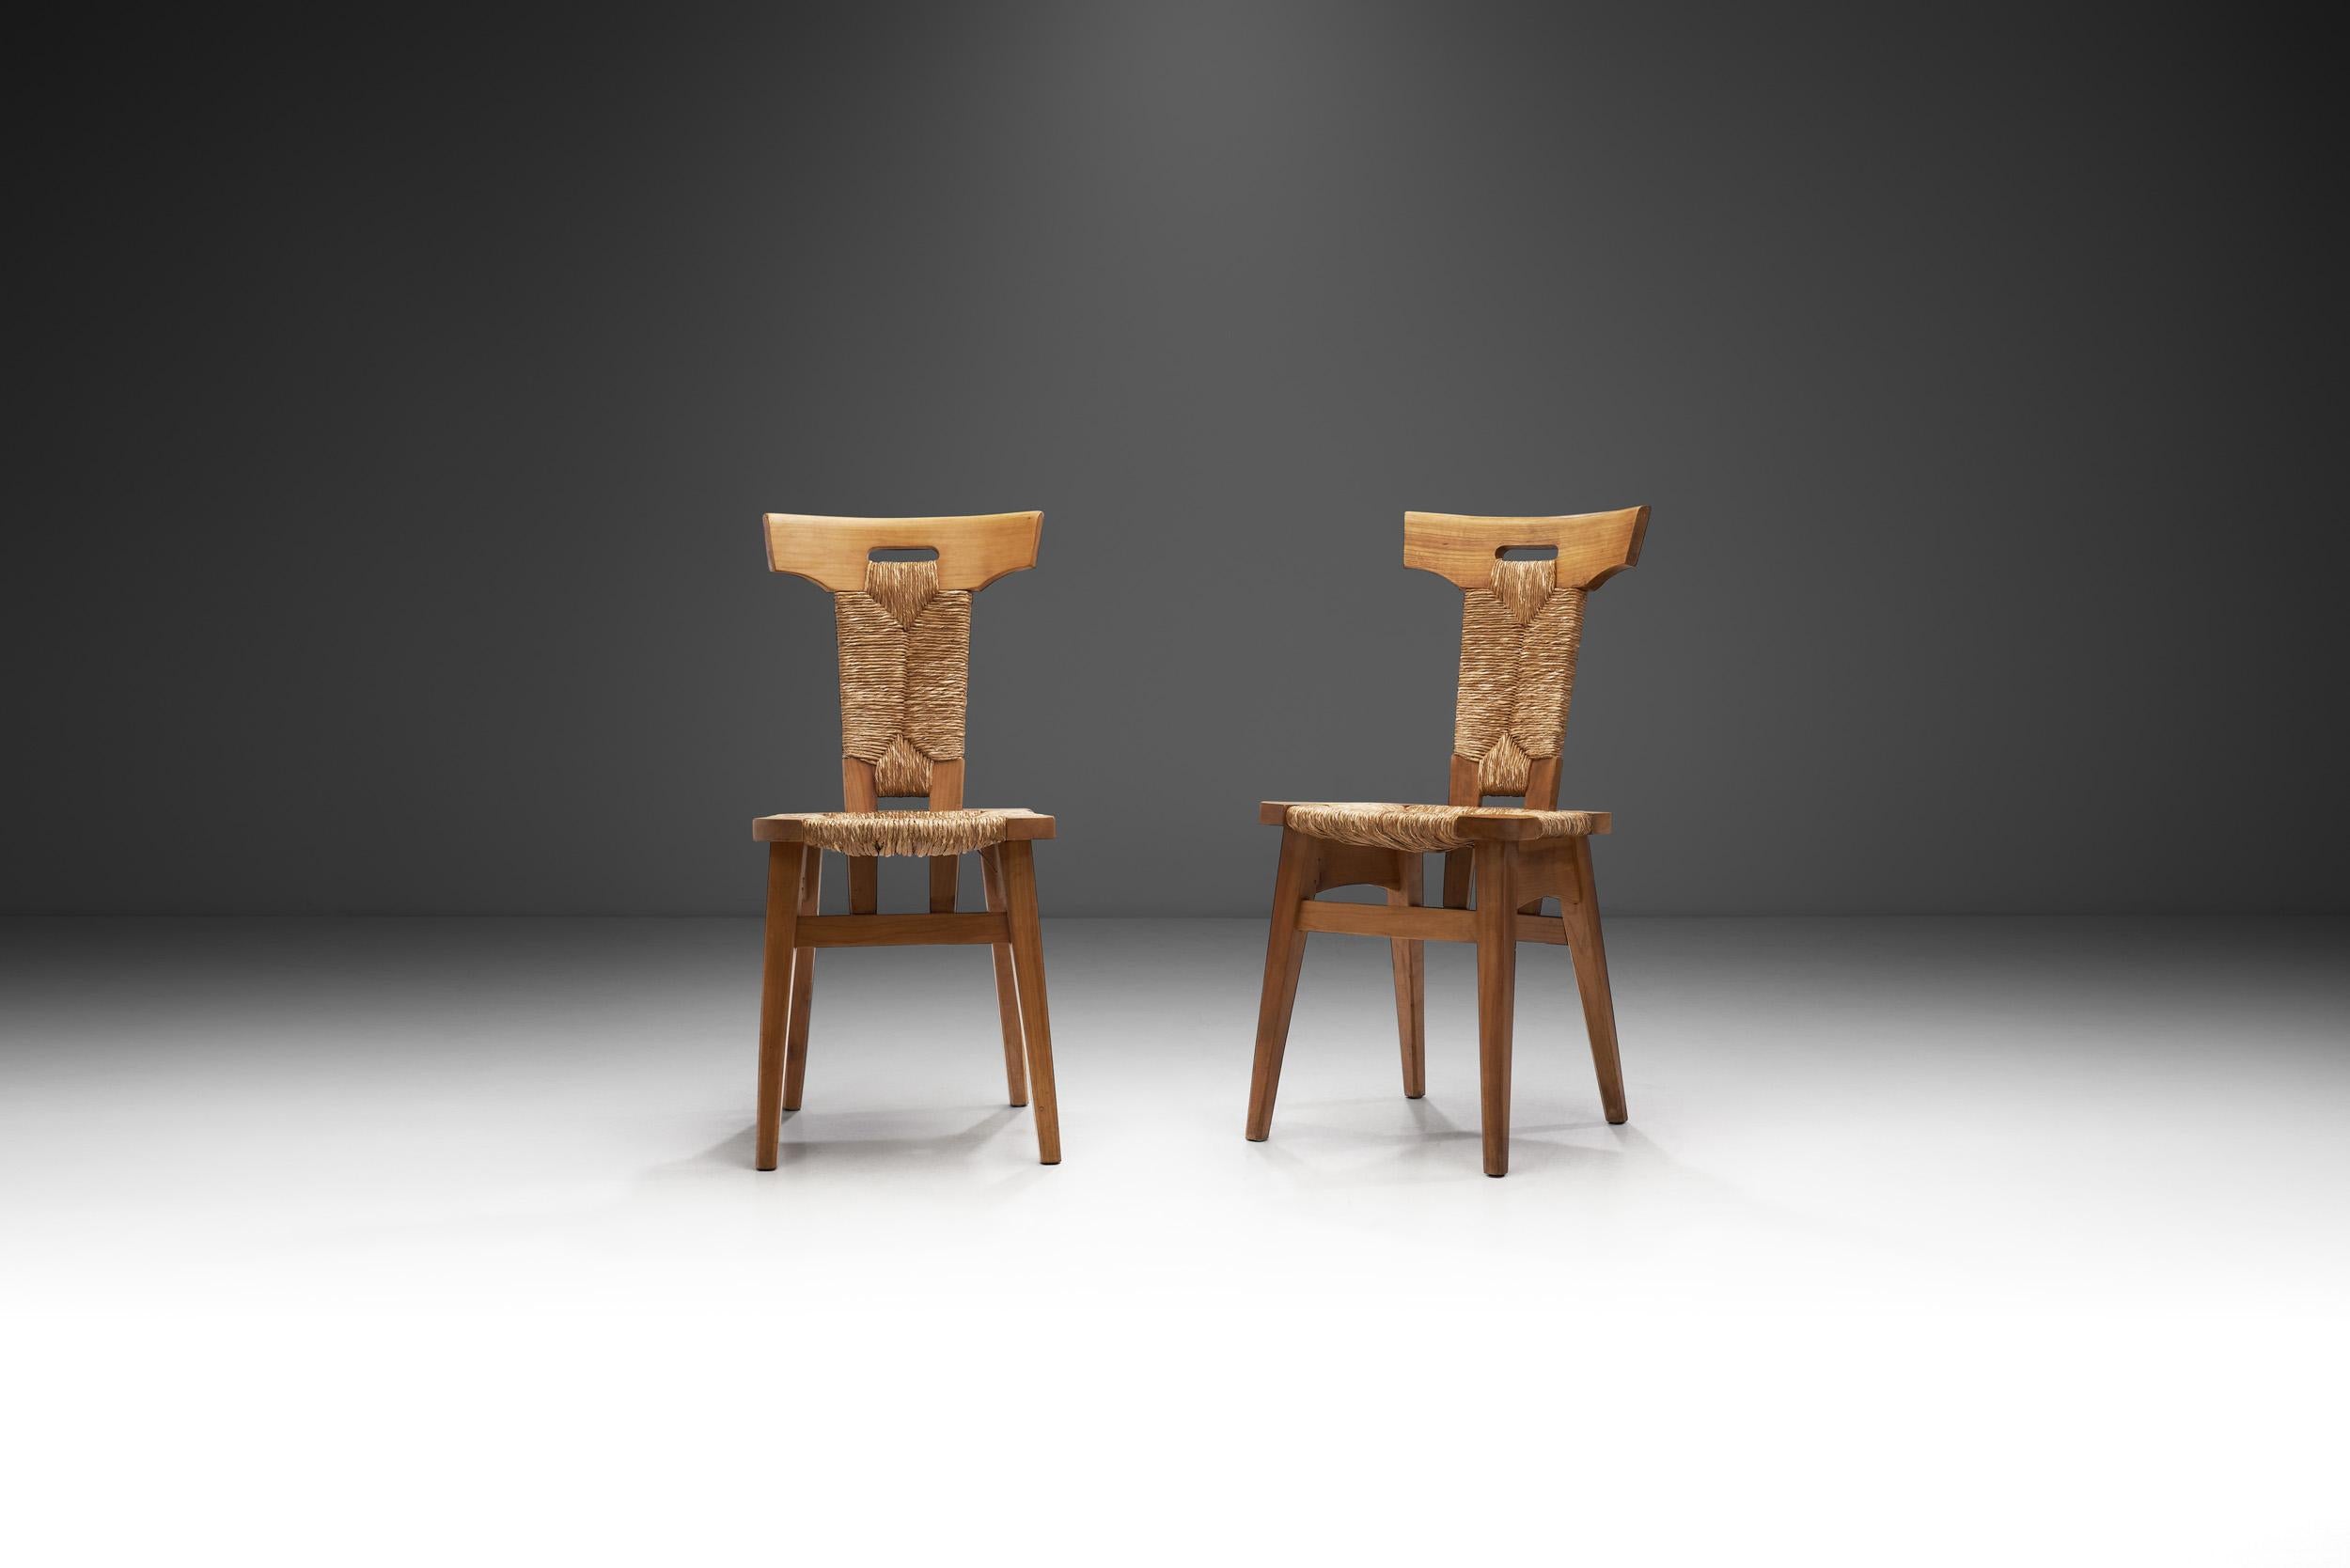 Mid-Century Modern Dutch Arts & Crafts Chairs by W. Kuyper, The Netherlands 1920s For Sale